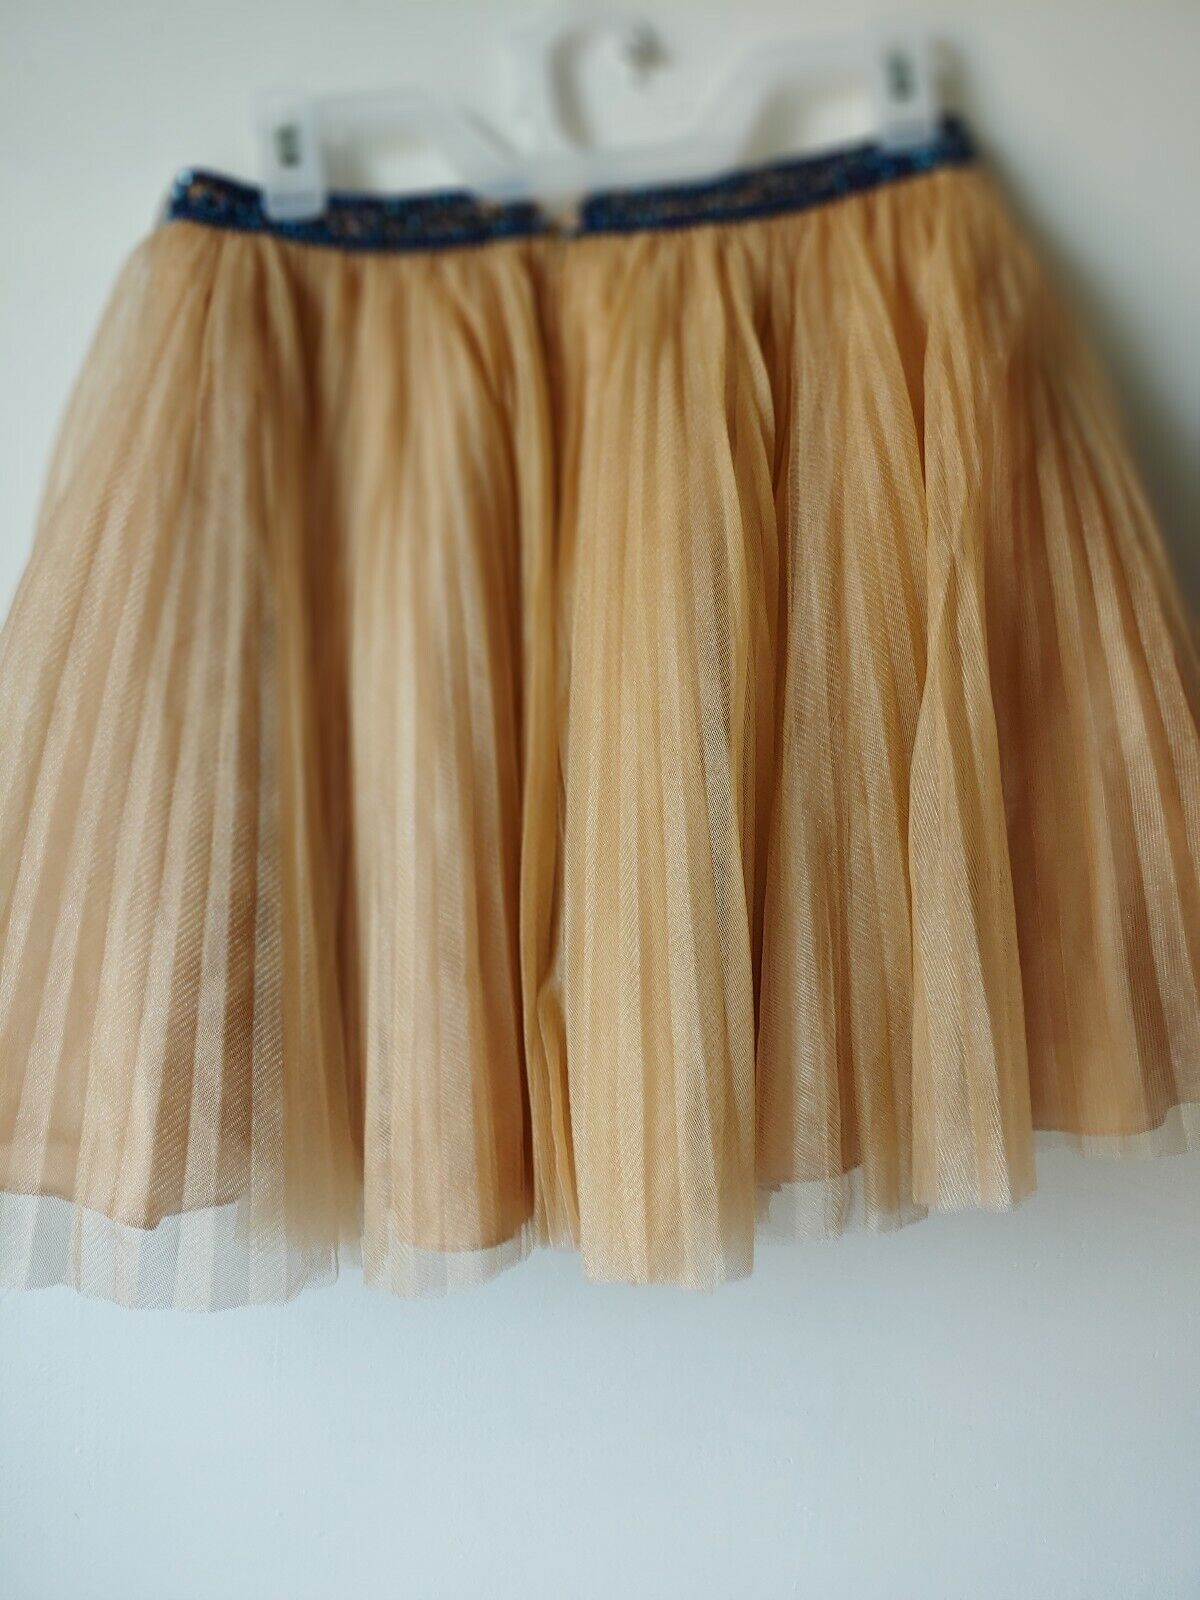 Sherri Hill Skirt Size 6Gold Or Ochre With Bright… - image 4